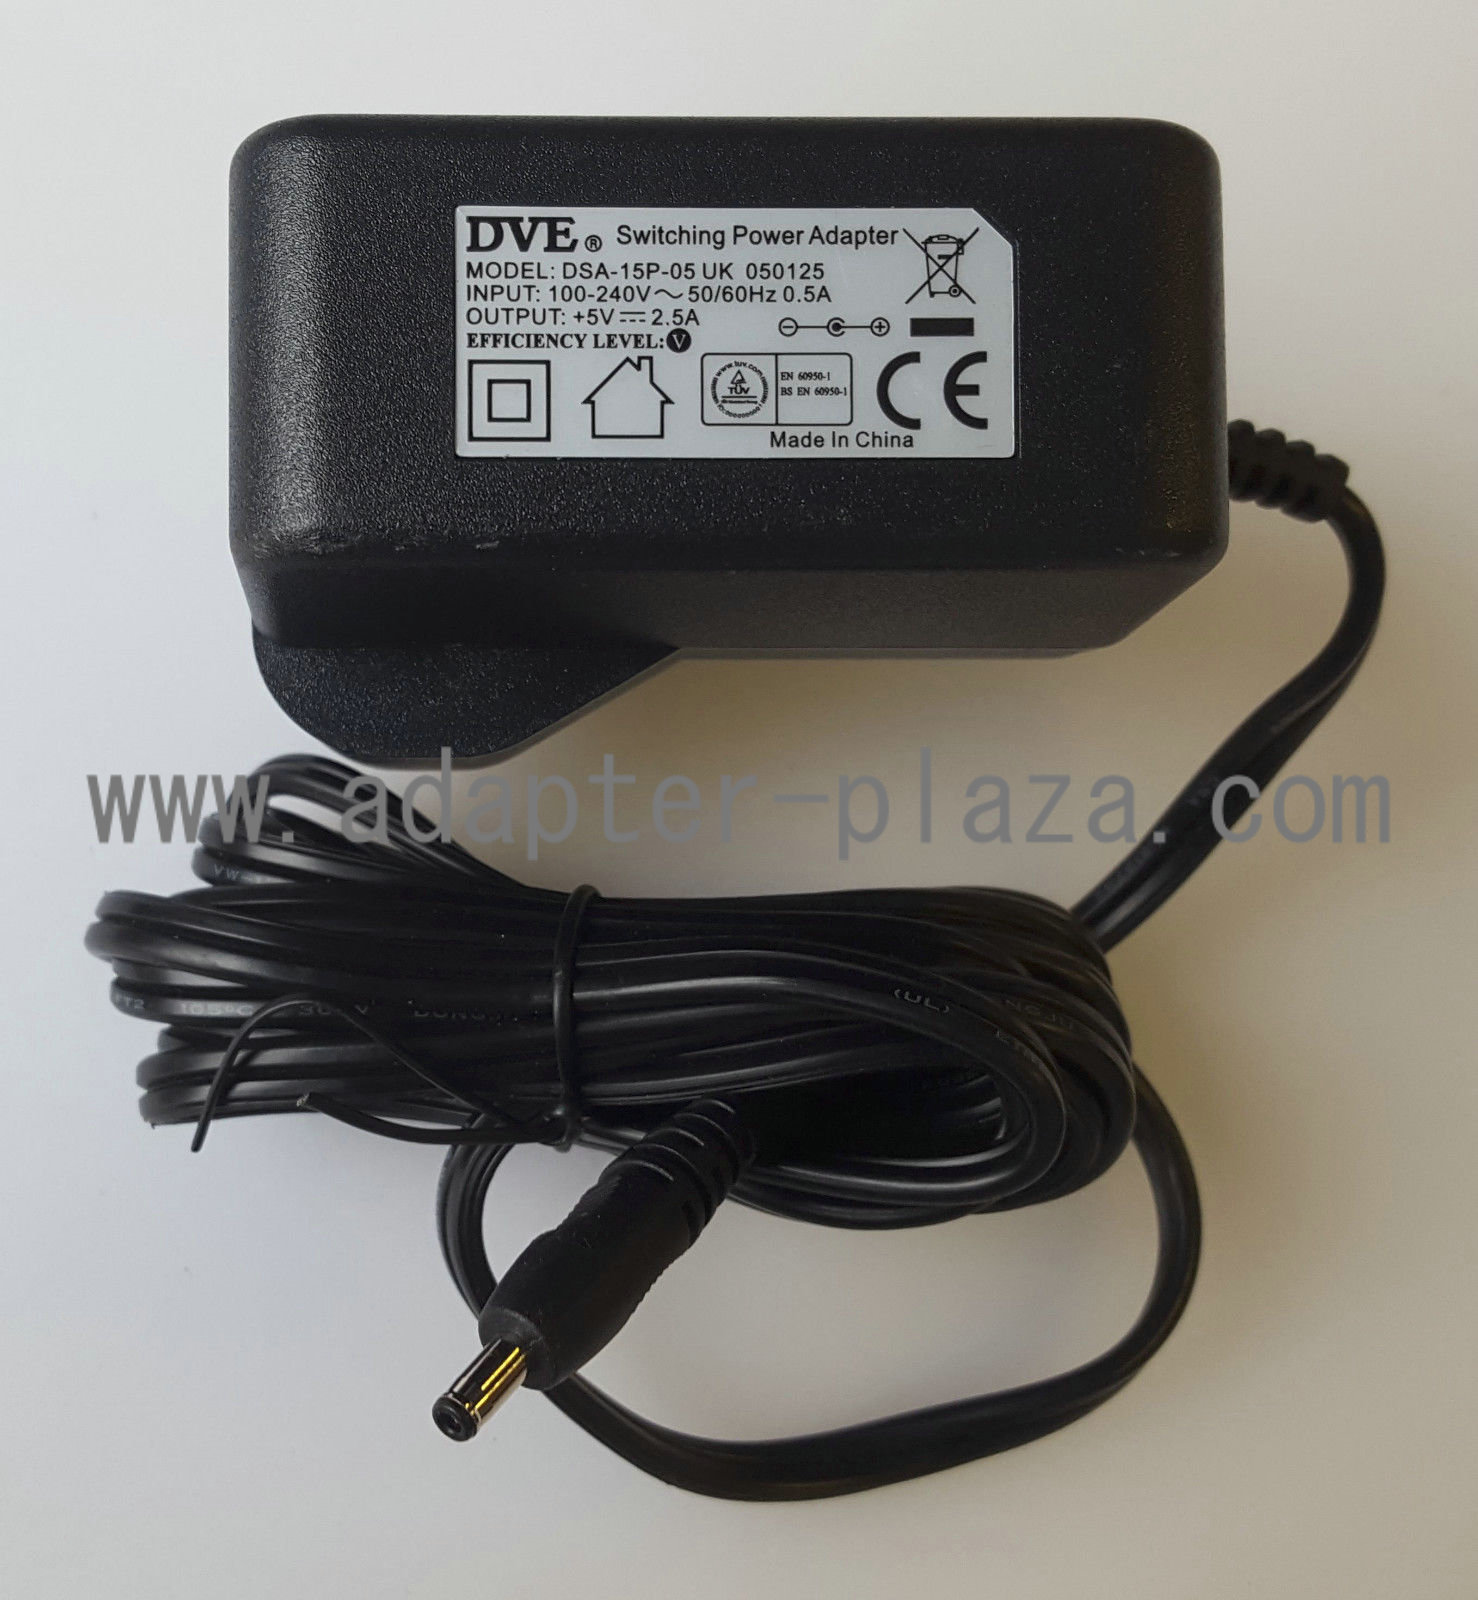 New DVE DSA-15P-05 5V 2.5A AC/DC SWITCHING POWER SUPPLY ADAPTER - Click Image to Close